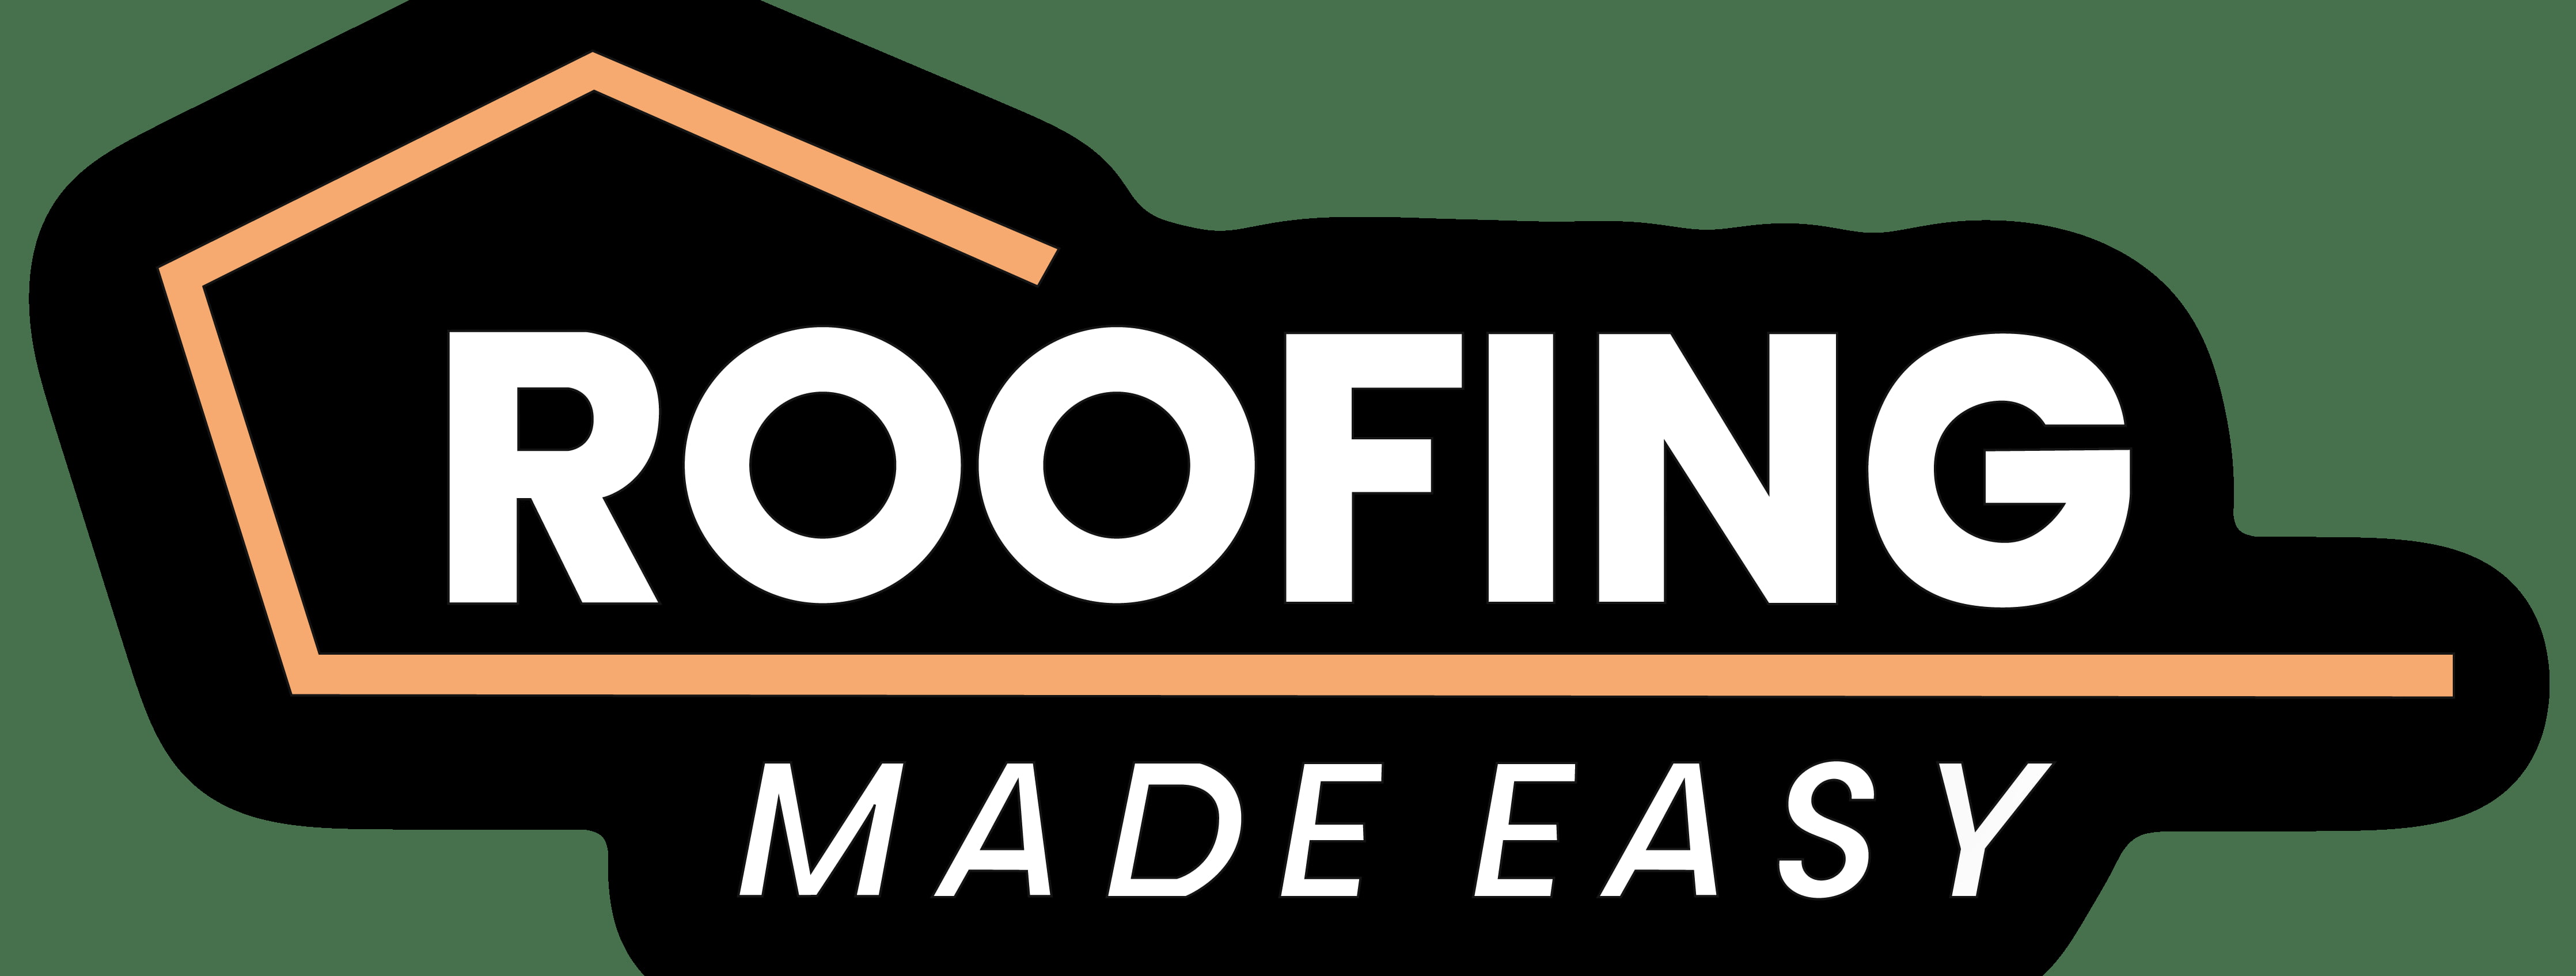 Roofing Made Easy roofing company in Indiana